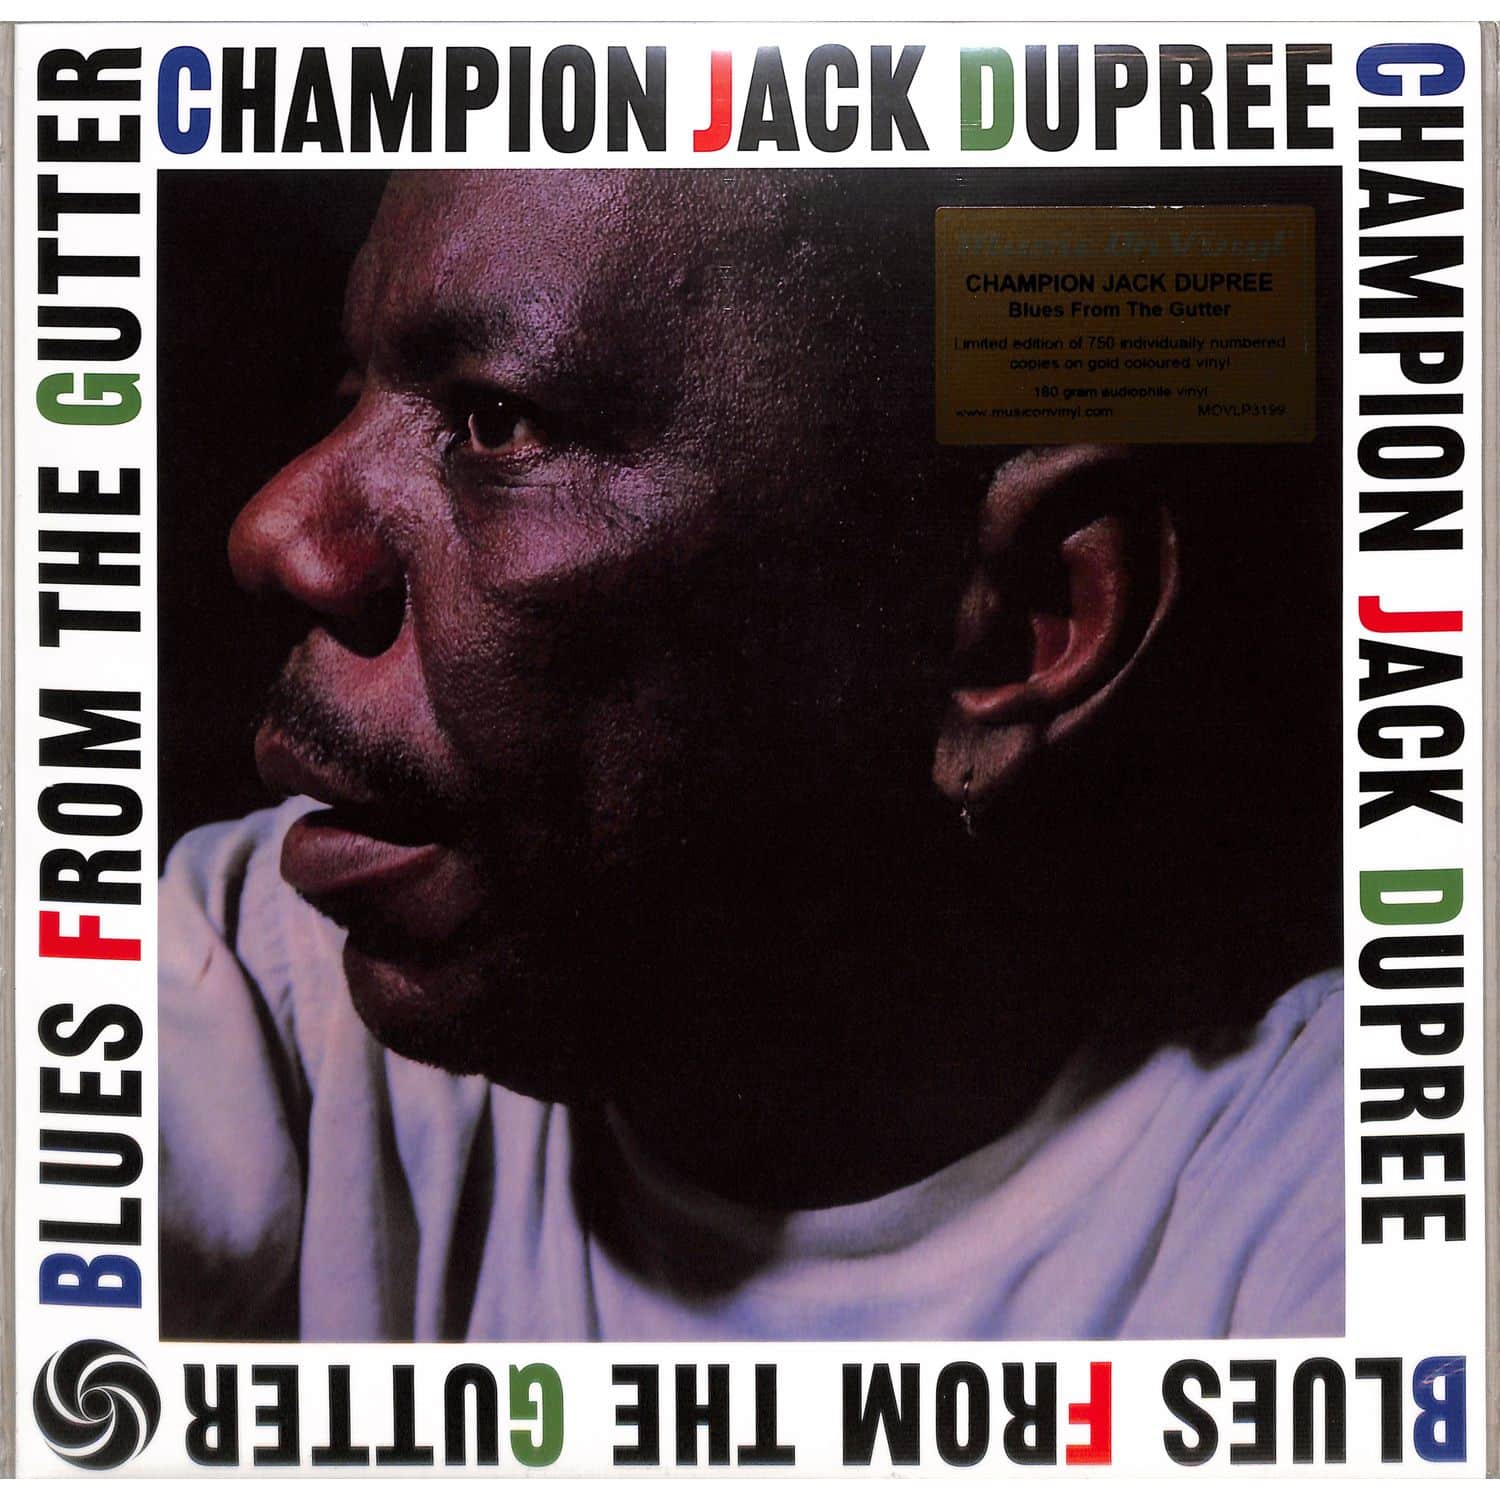 Champion Jack Dupree - BLUES FROM THE GUTTER 